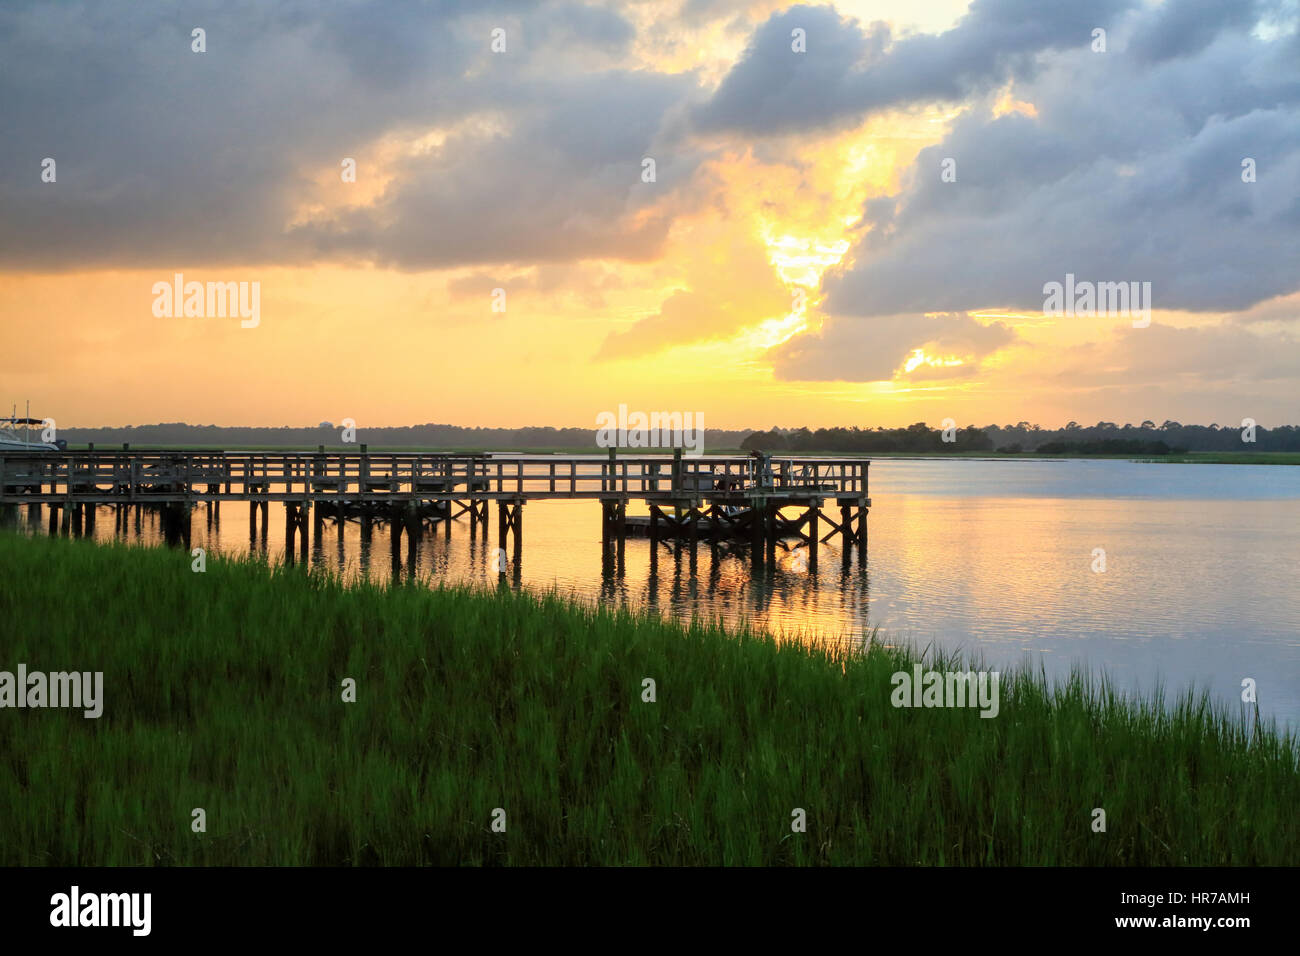 Sunset over the Kiawah River on Kiawah Island, South Carolina. The silhouette of several piers is light with sunset light. Stock Photo